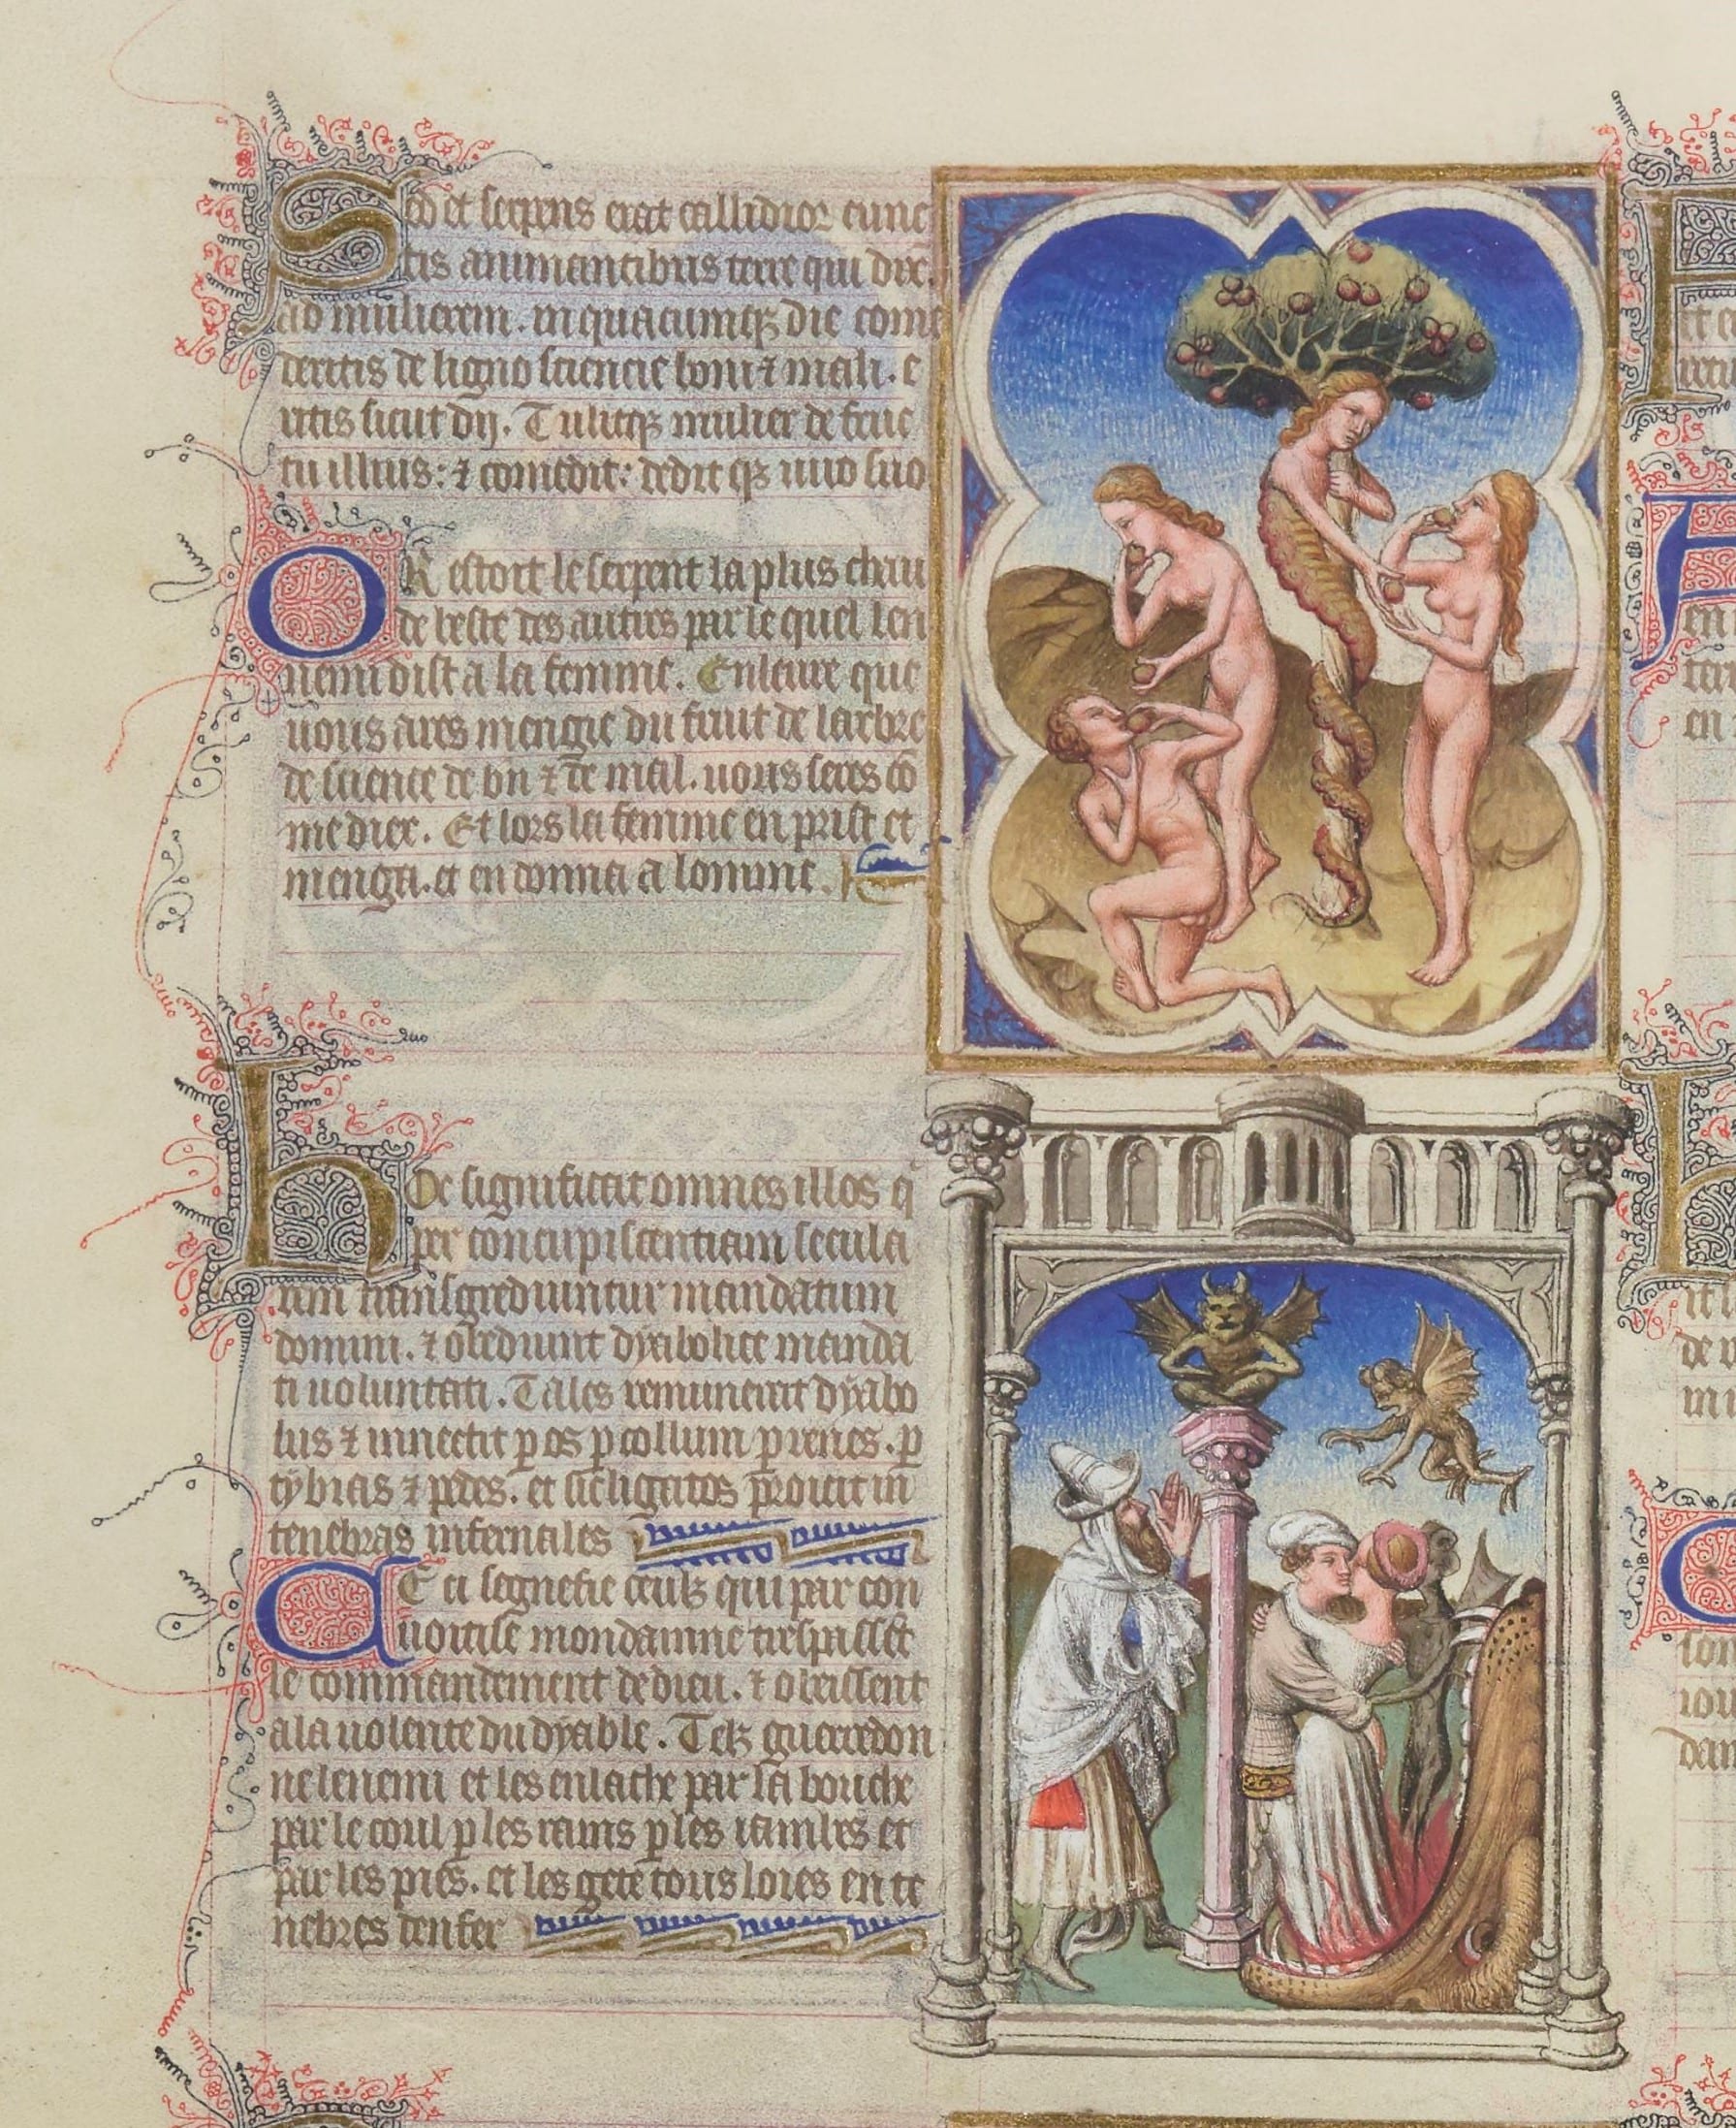 Figure 4. The Limbourg Brothers, Bible moralisèe, folio 3v (detail) (image provided by the Bibliothèque nationale de France).